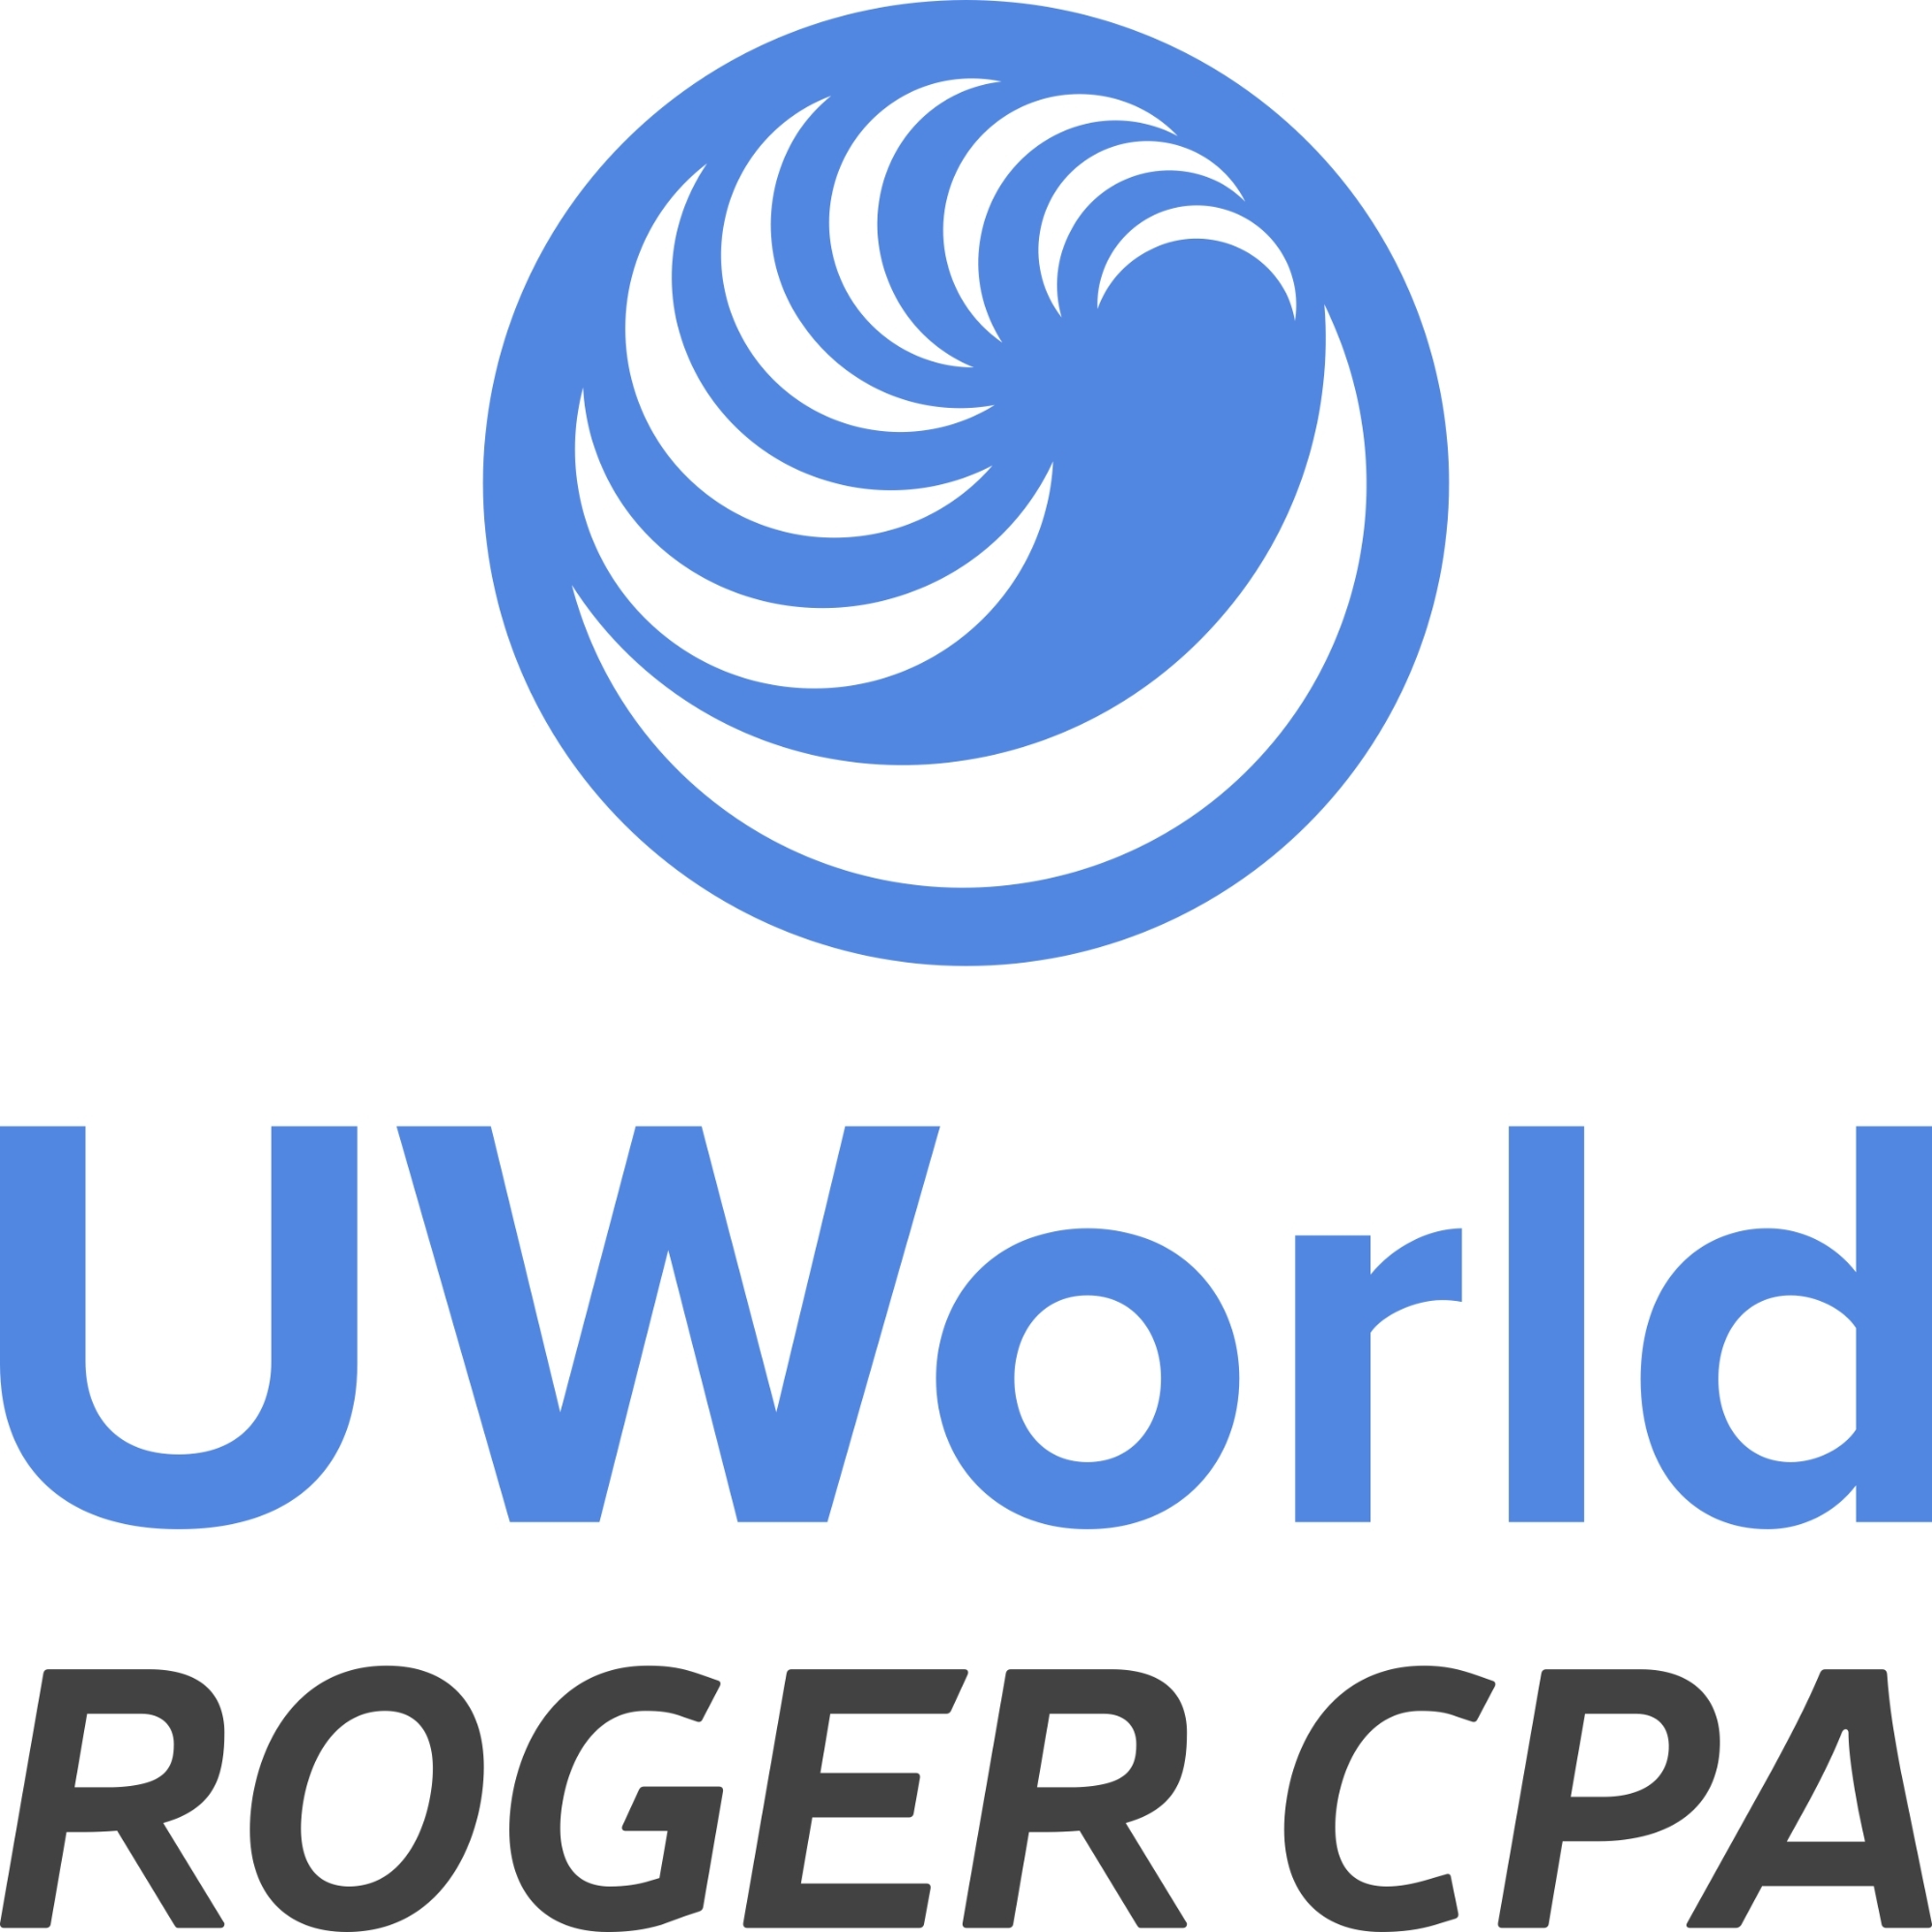 Uworld Roger CPA Review 2021